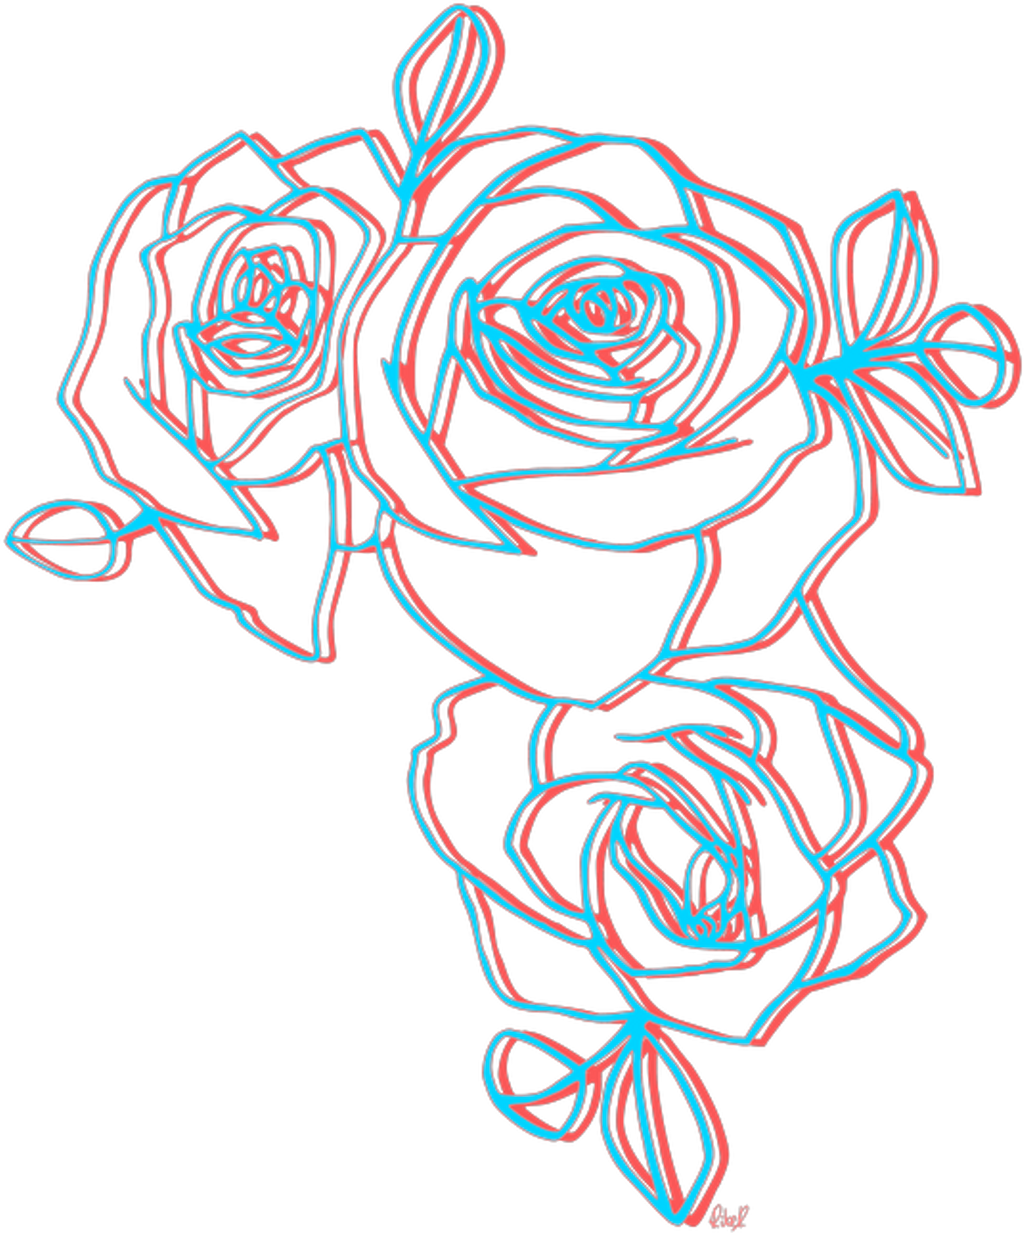 Aesthetic Rose PNG HD Quality